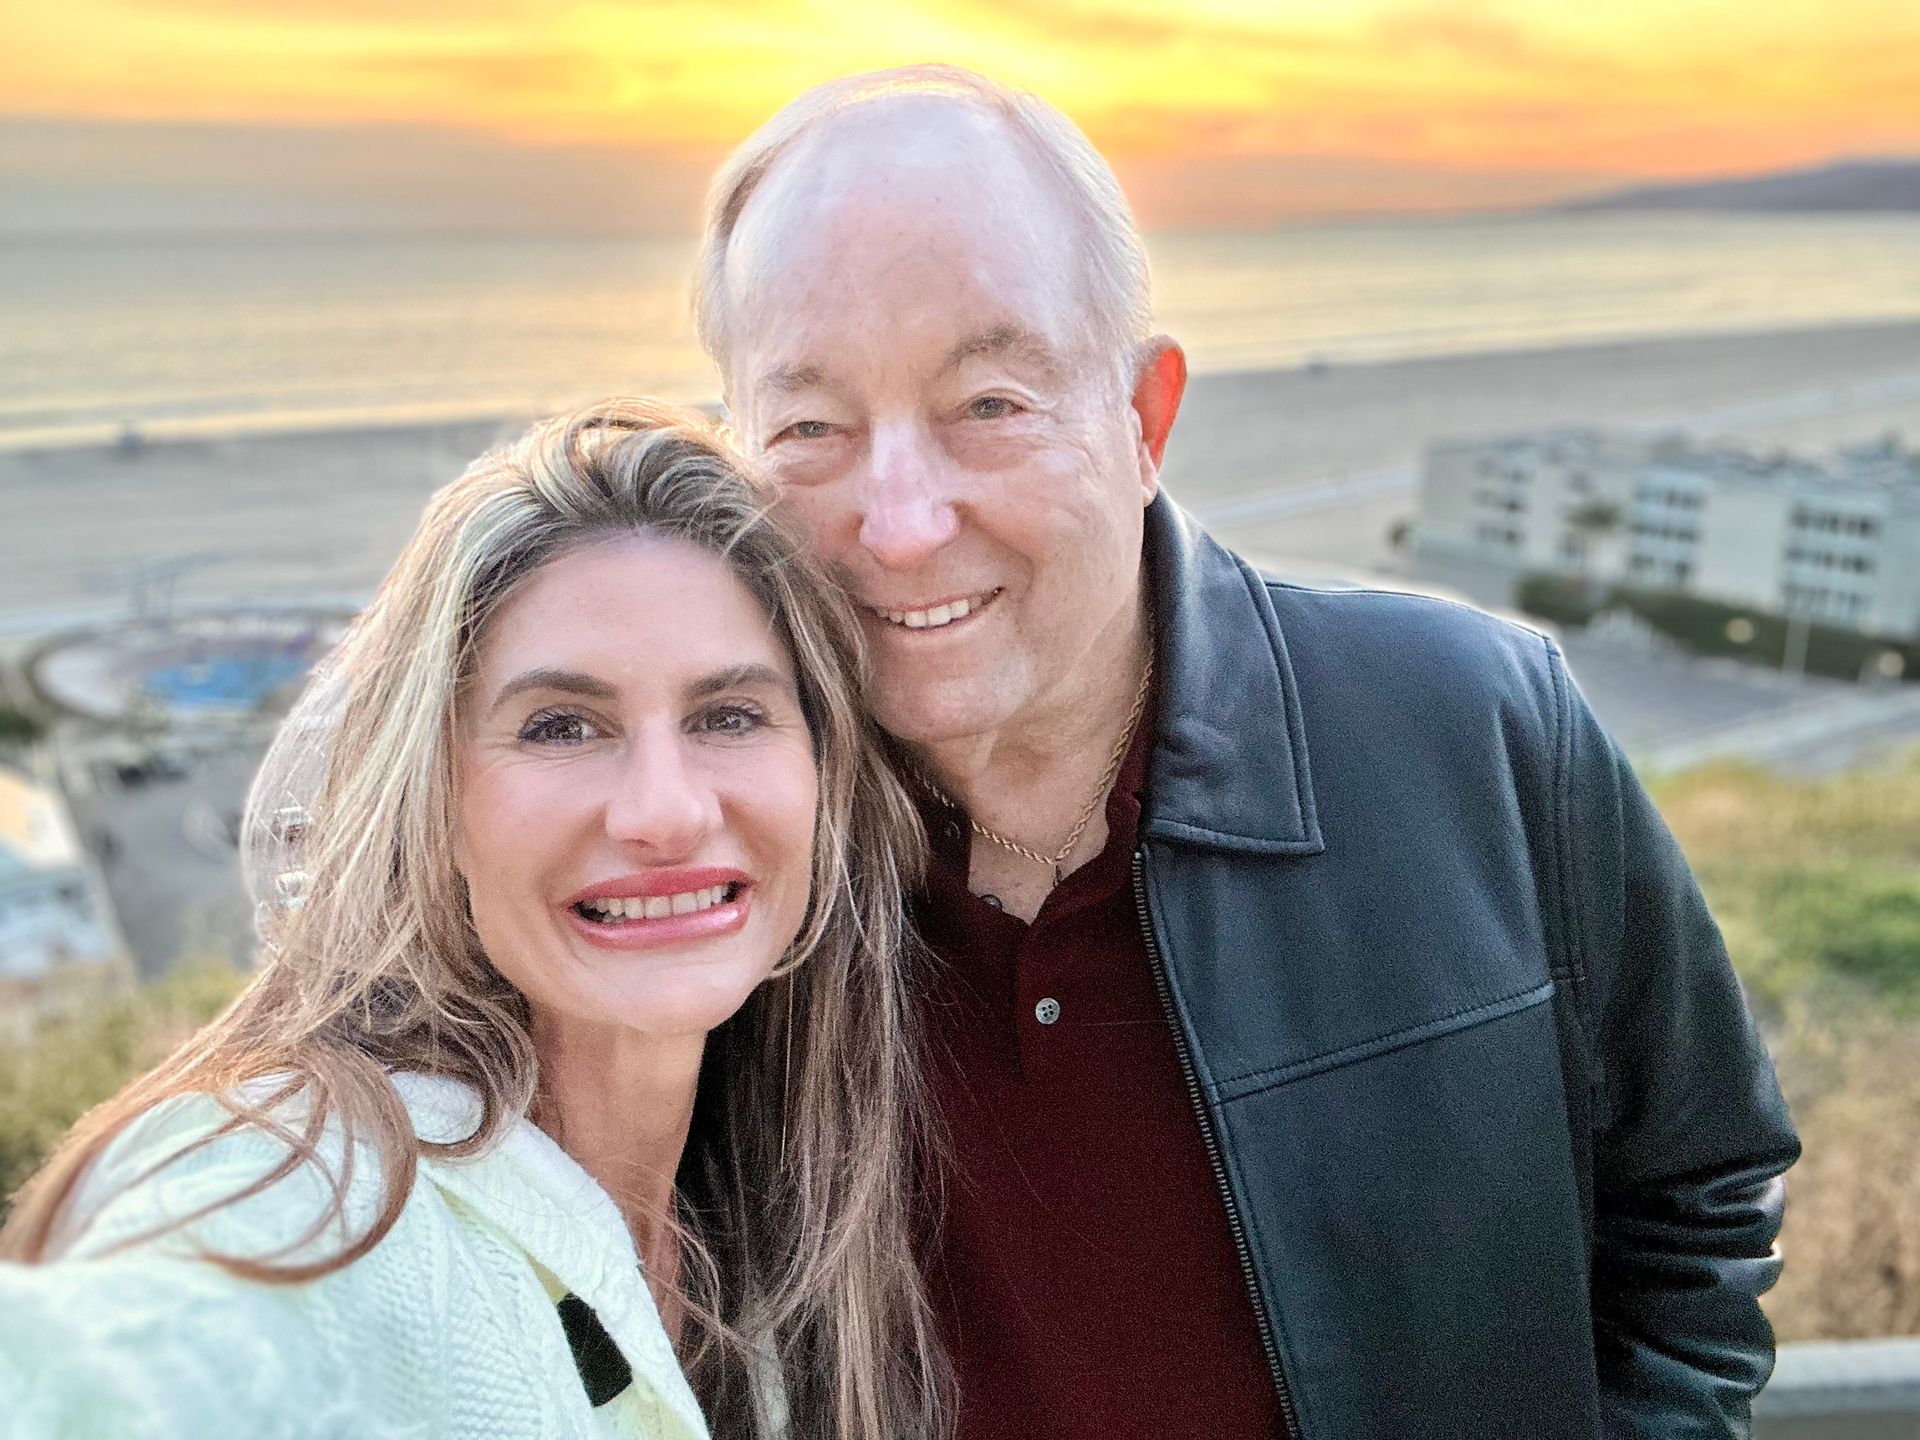 Baleny pictured with Don overlooking Santa Monica Beach